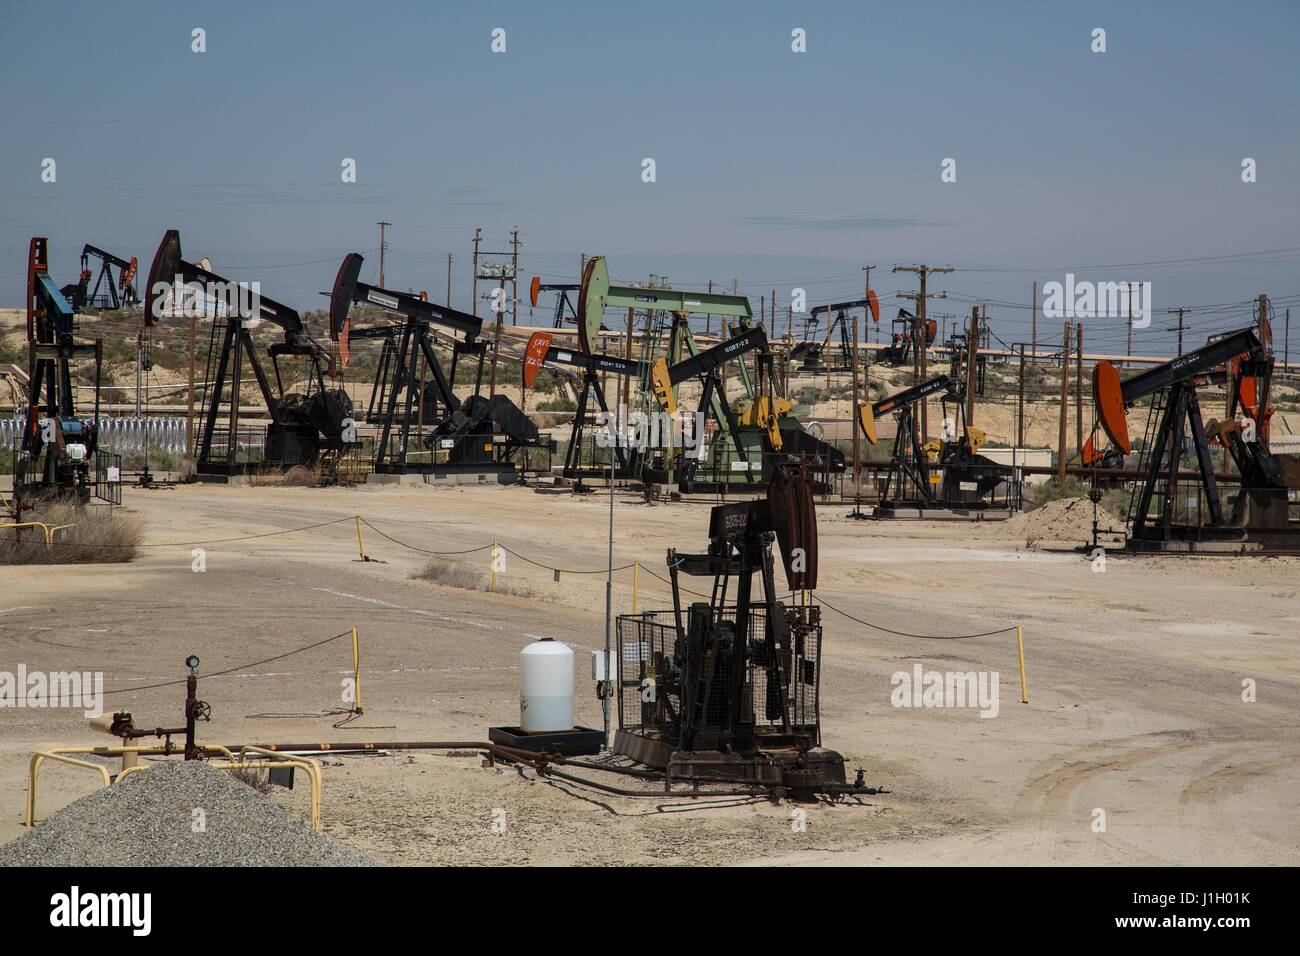 Oil pump jacks cover the ground in the Kern River Oil Field along the San Joaquin Valley April 11, 2017 in Bakersfield, California. The oil and gas wells that cover the area are on public land leased by the federal Bureau of Land Management. Stock Photo